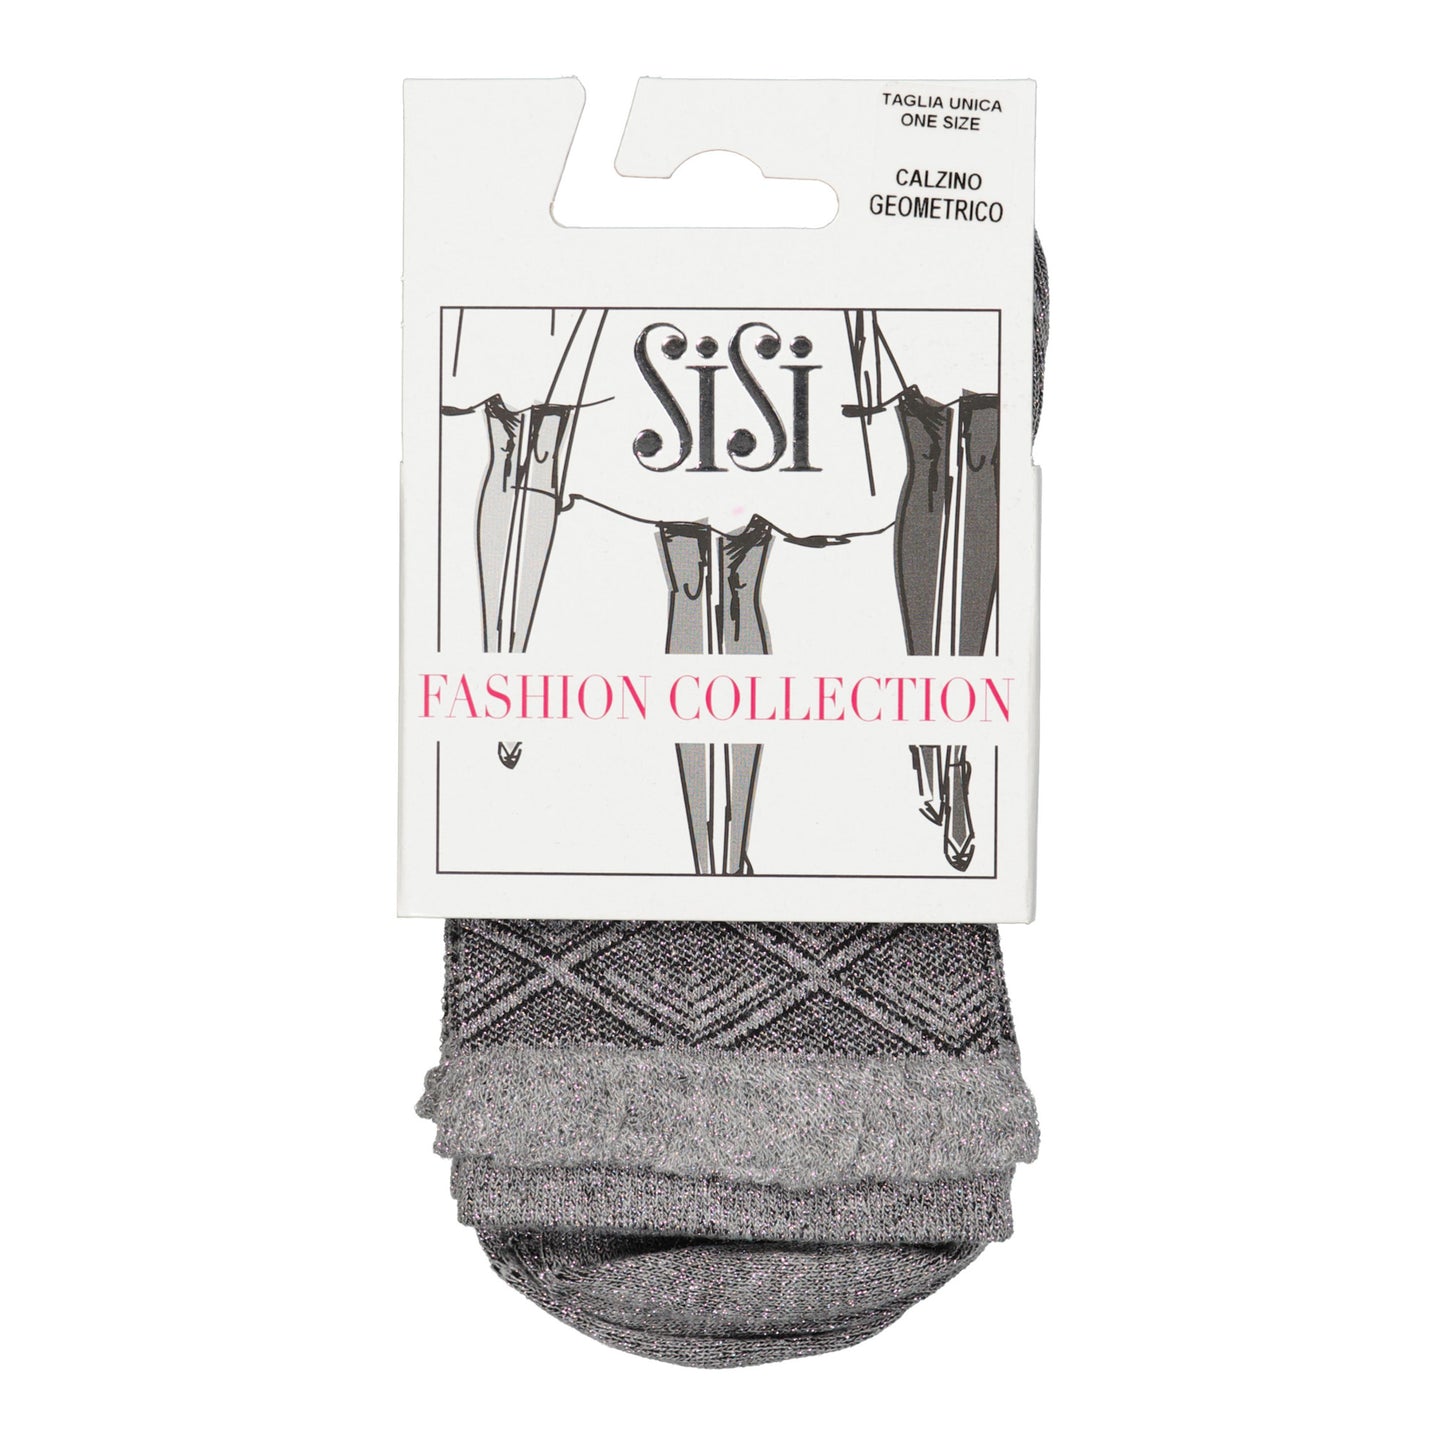 SiSi Geometrico Sock - Light silver grey fashion ankle socks with a black diamond pattern, sparkly silver lamé knitted through a small frill cuff.